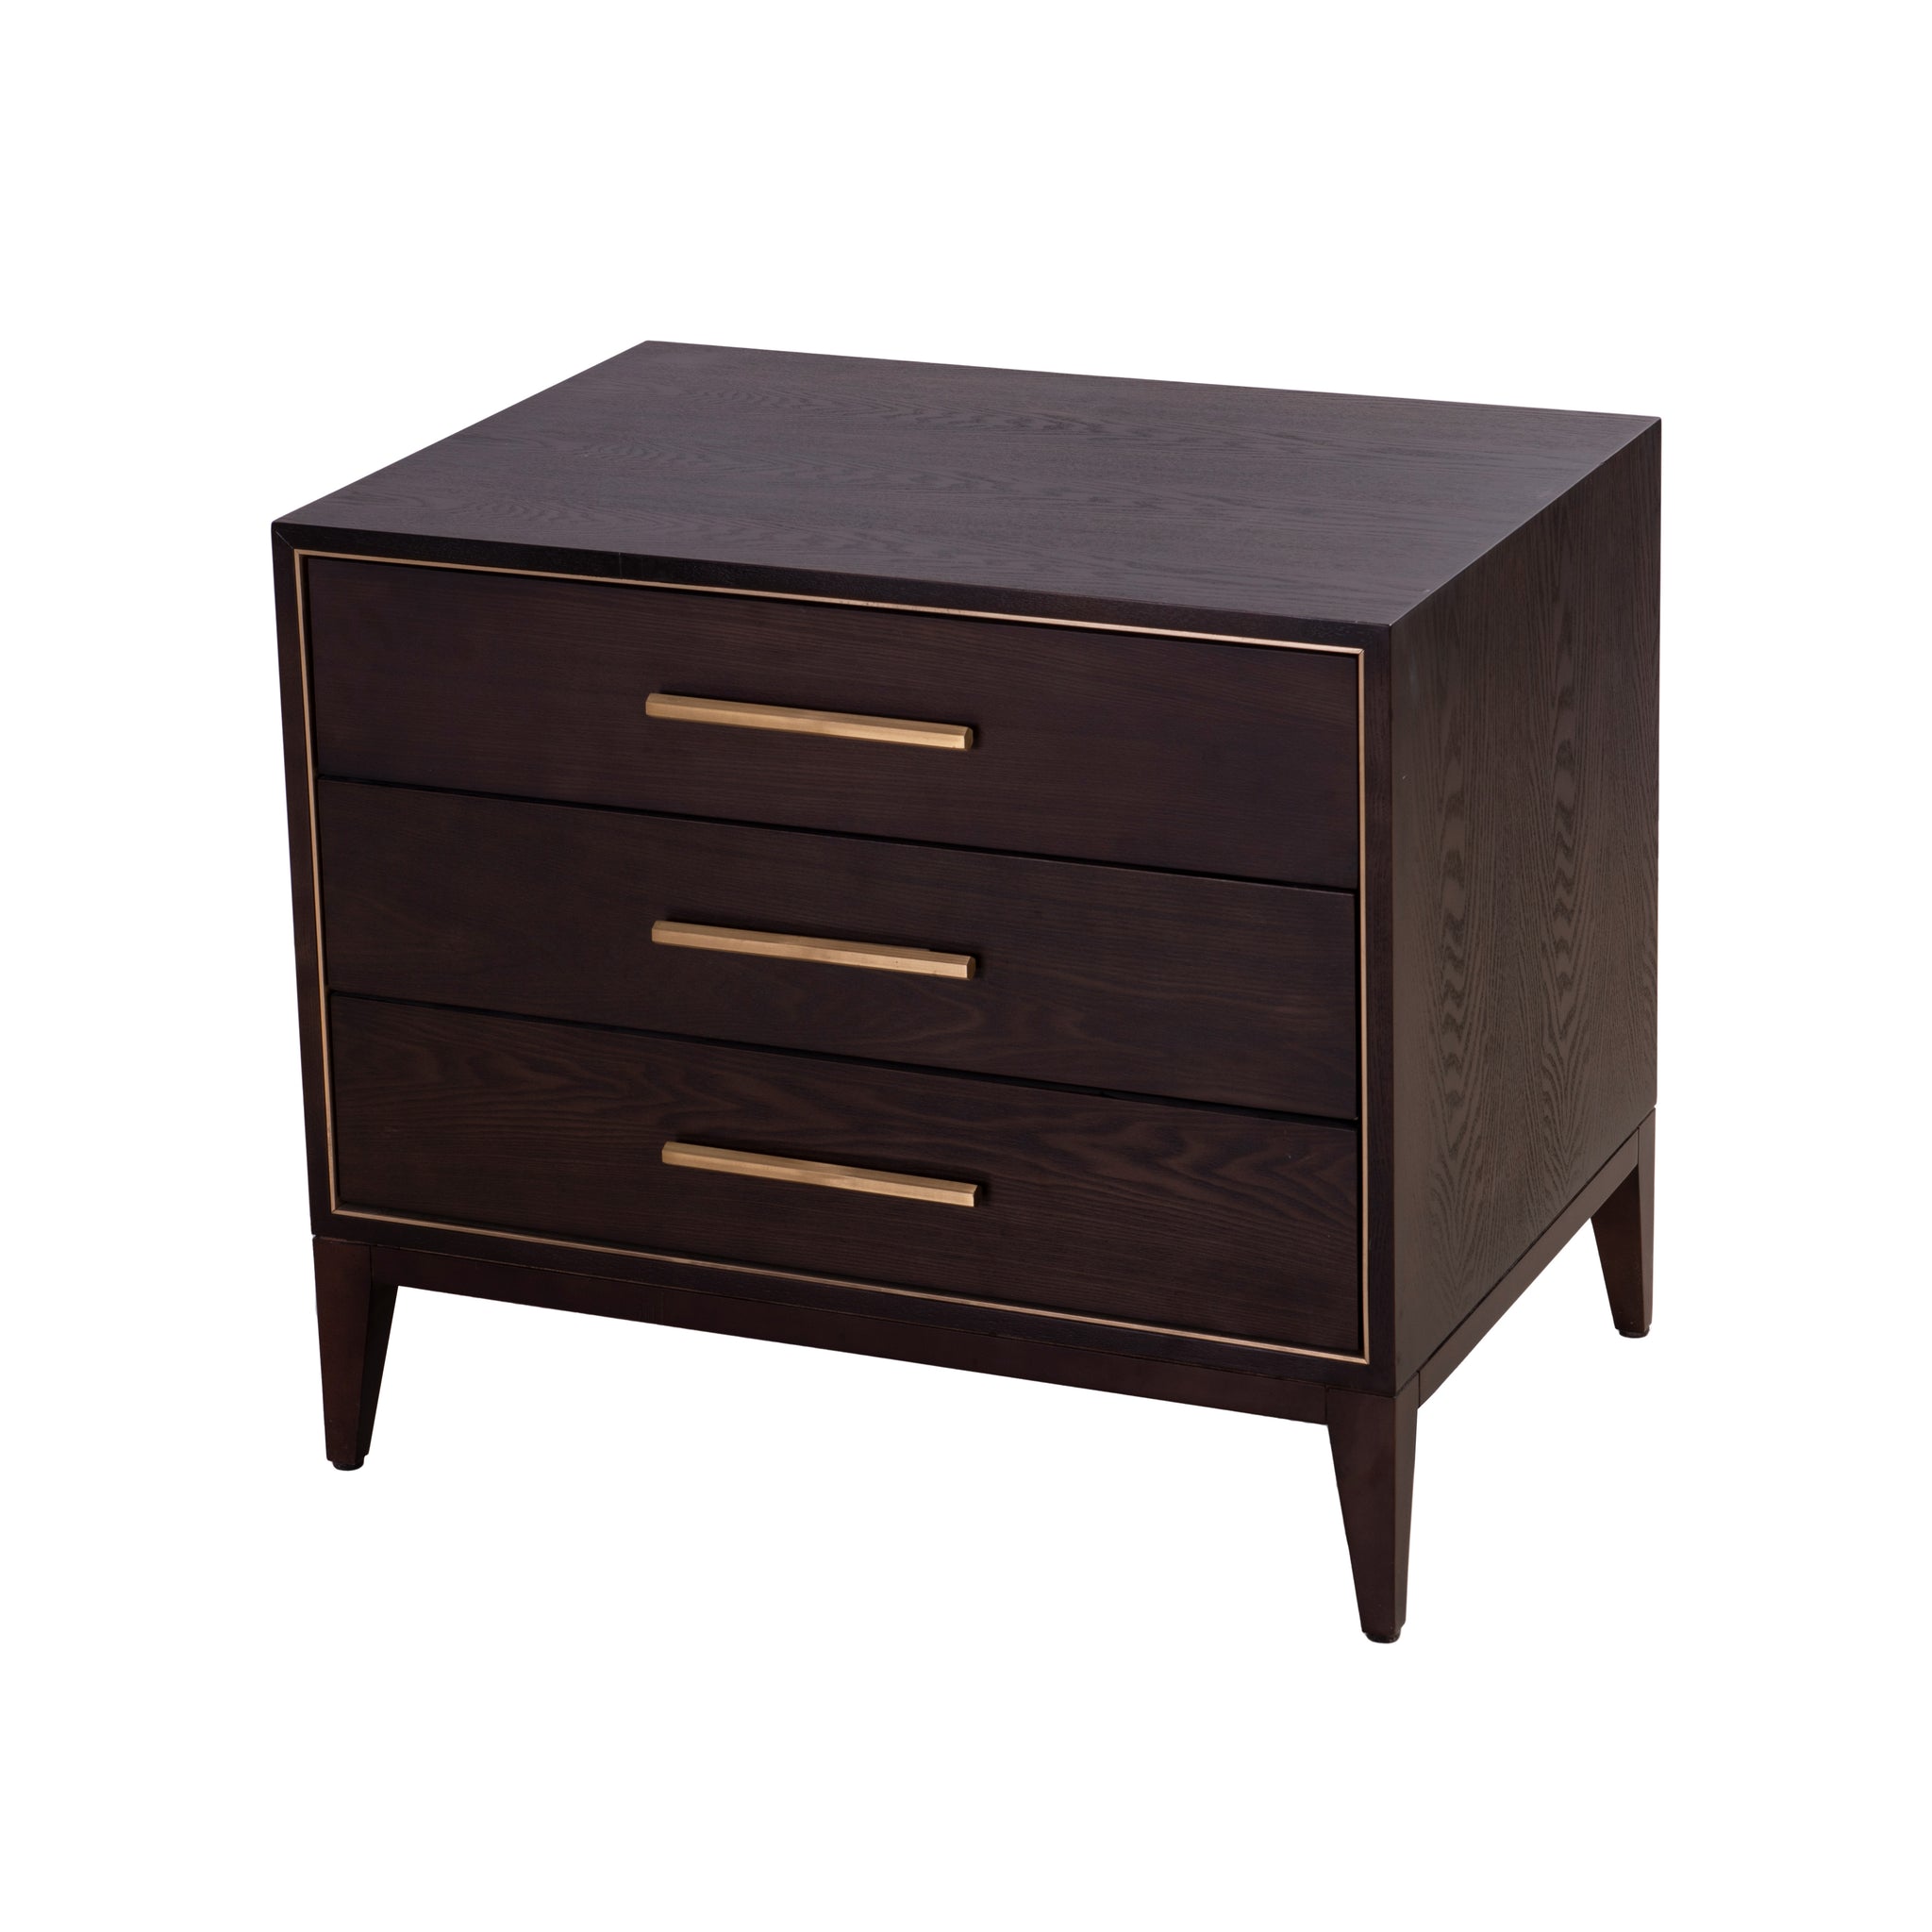 Tomas 3 Drawer Chocolate Bedside Table Brass Inlay Detail